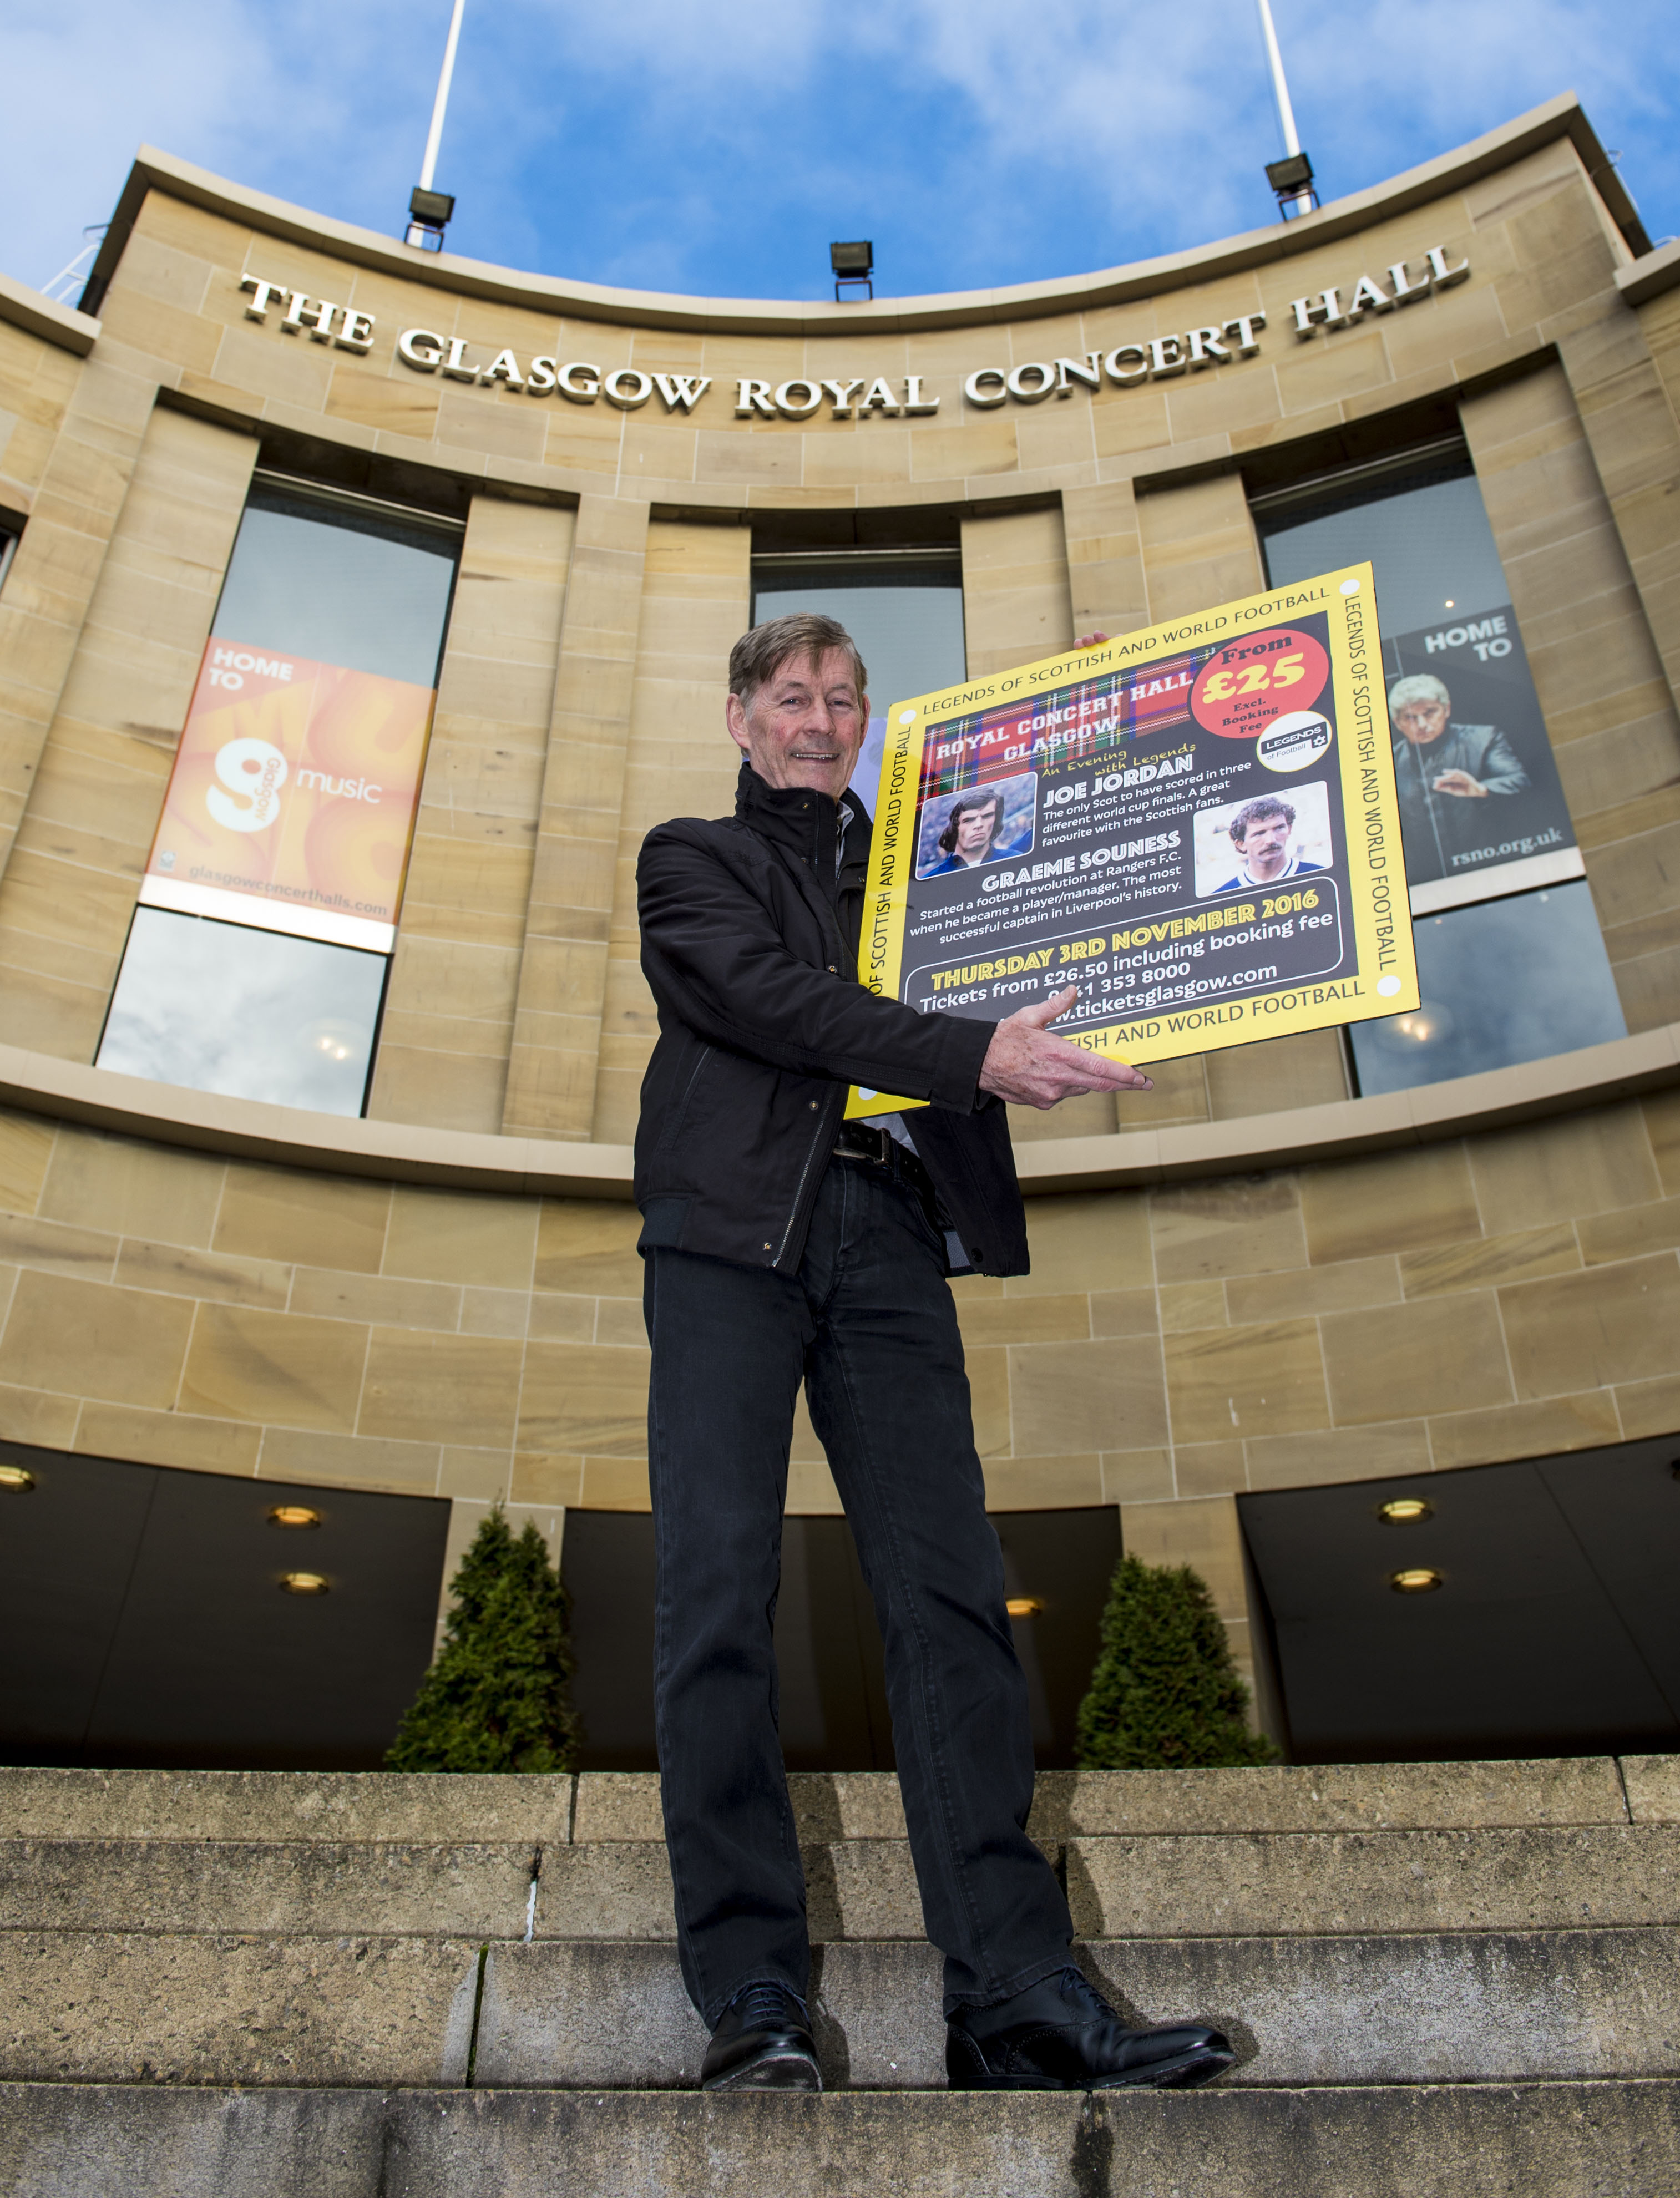 24/10/16 ROYAL CONCERT HALL - GLASGOW Jim McCalliog was on hand to promote the inaugural Legends of Football event.